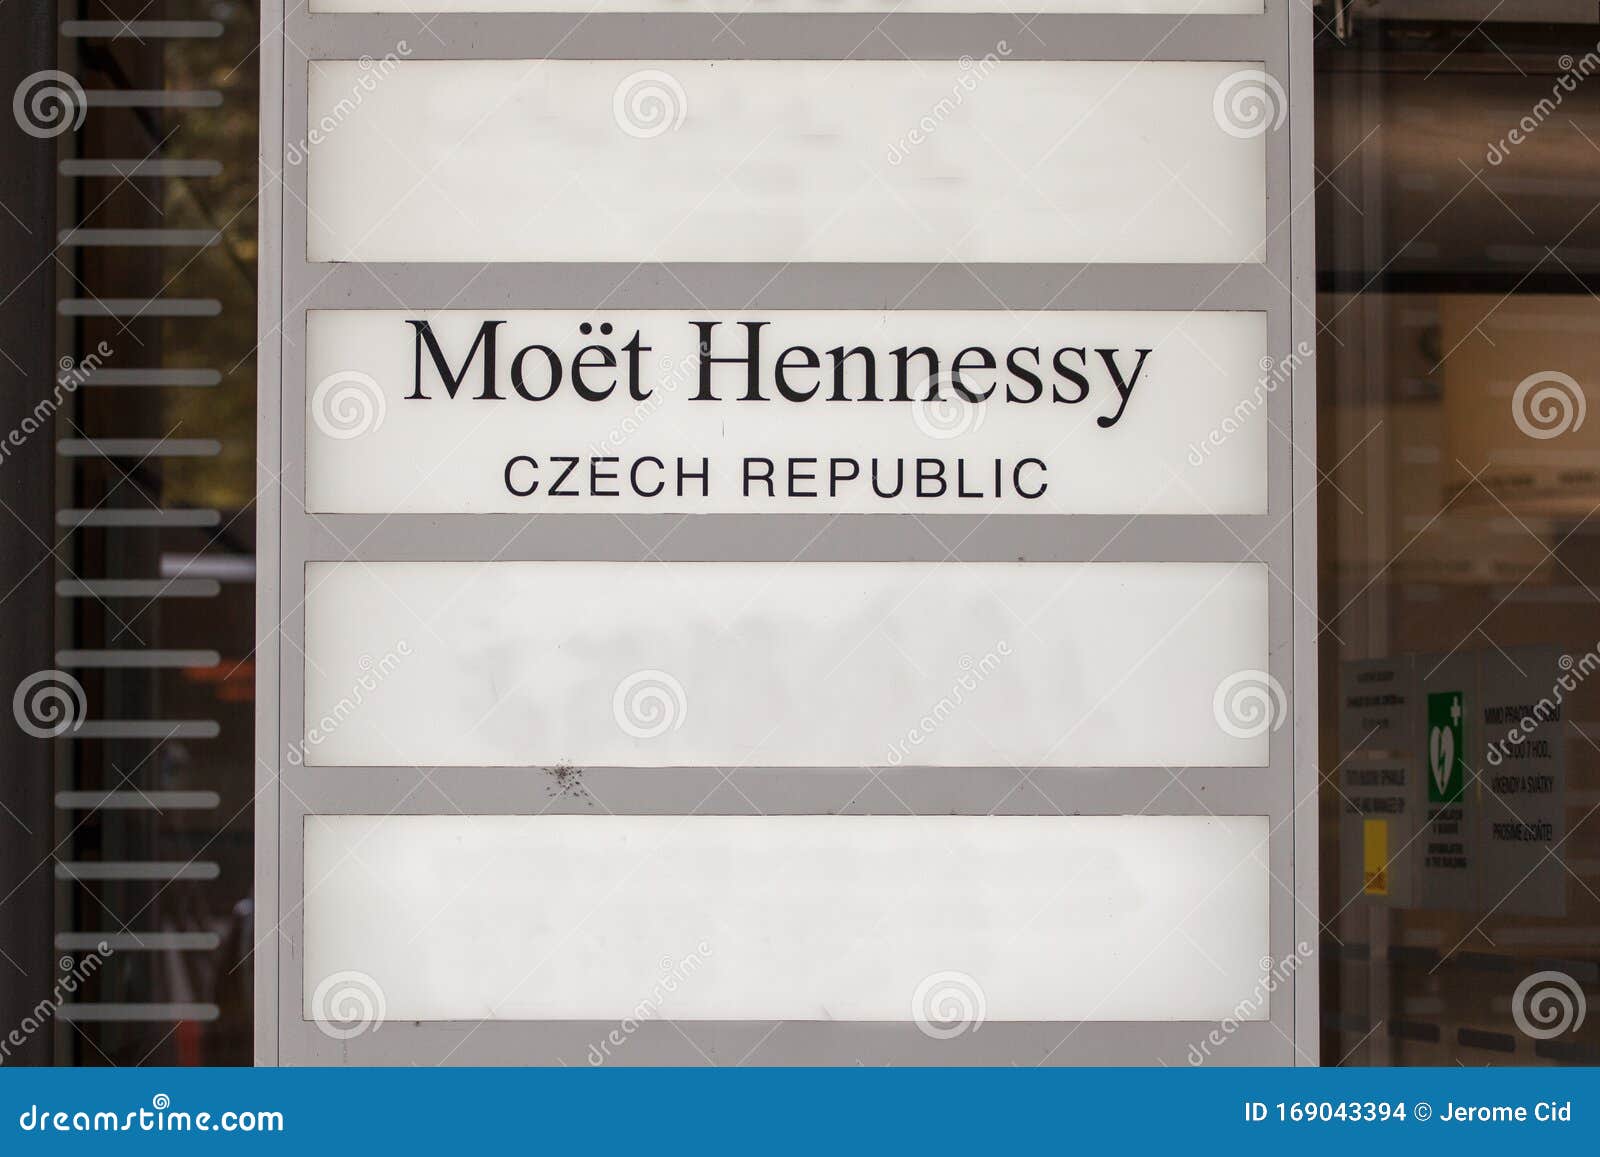 Moet Hennessy Logo in Front of Their Office for Czech Republic